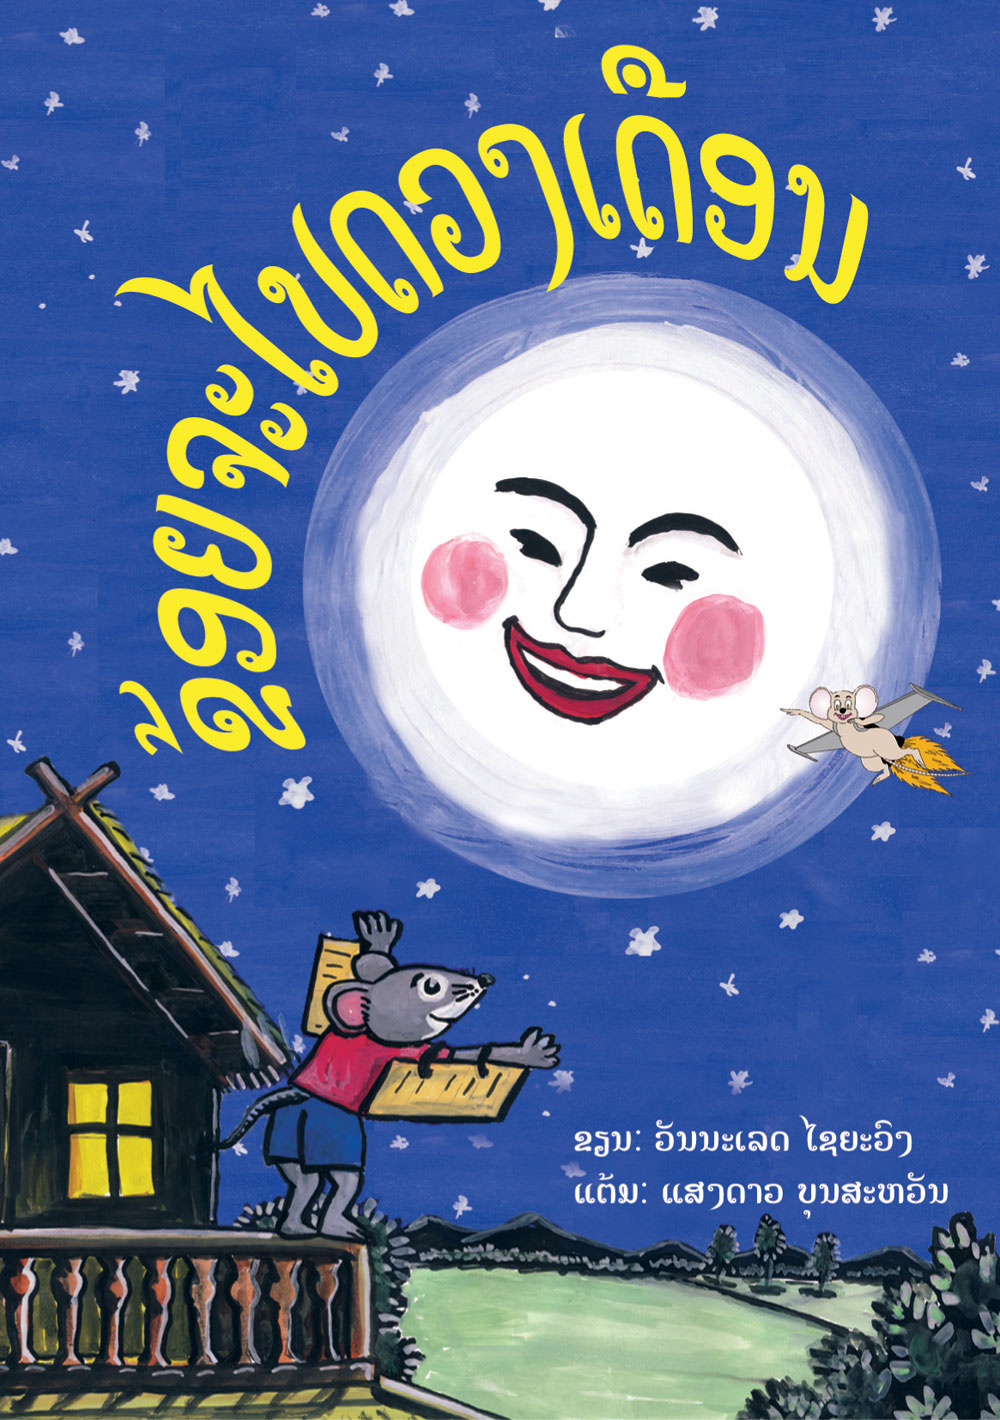 I Will See the Moon large book cover, published in Lao language